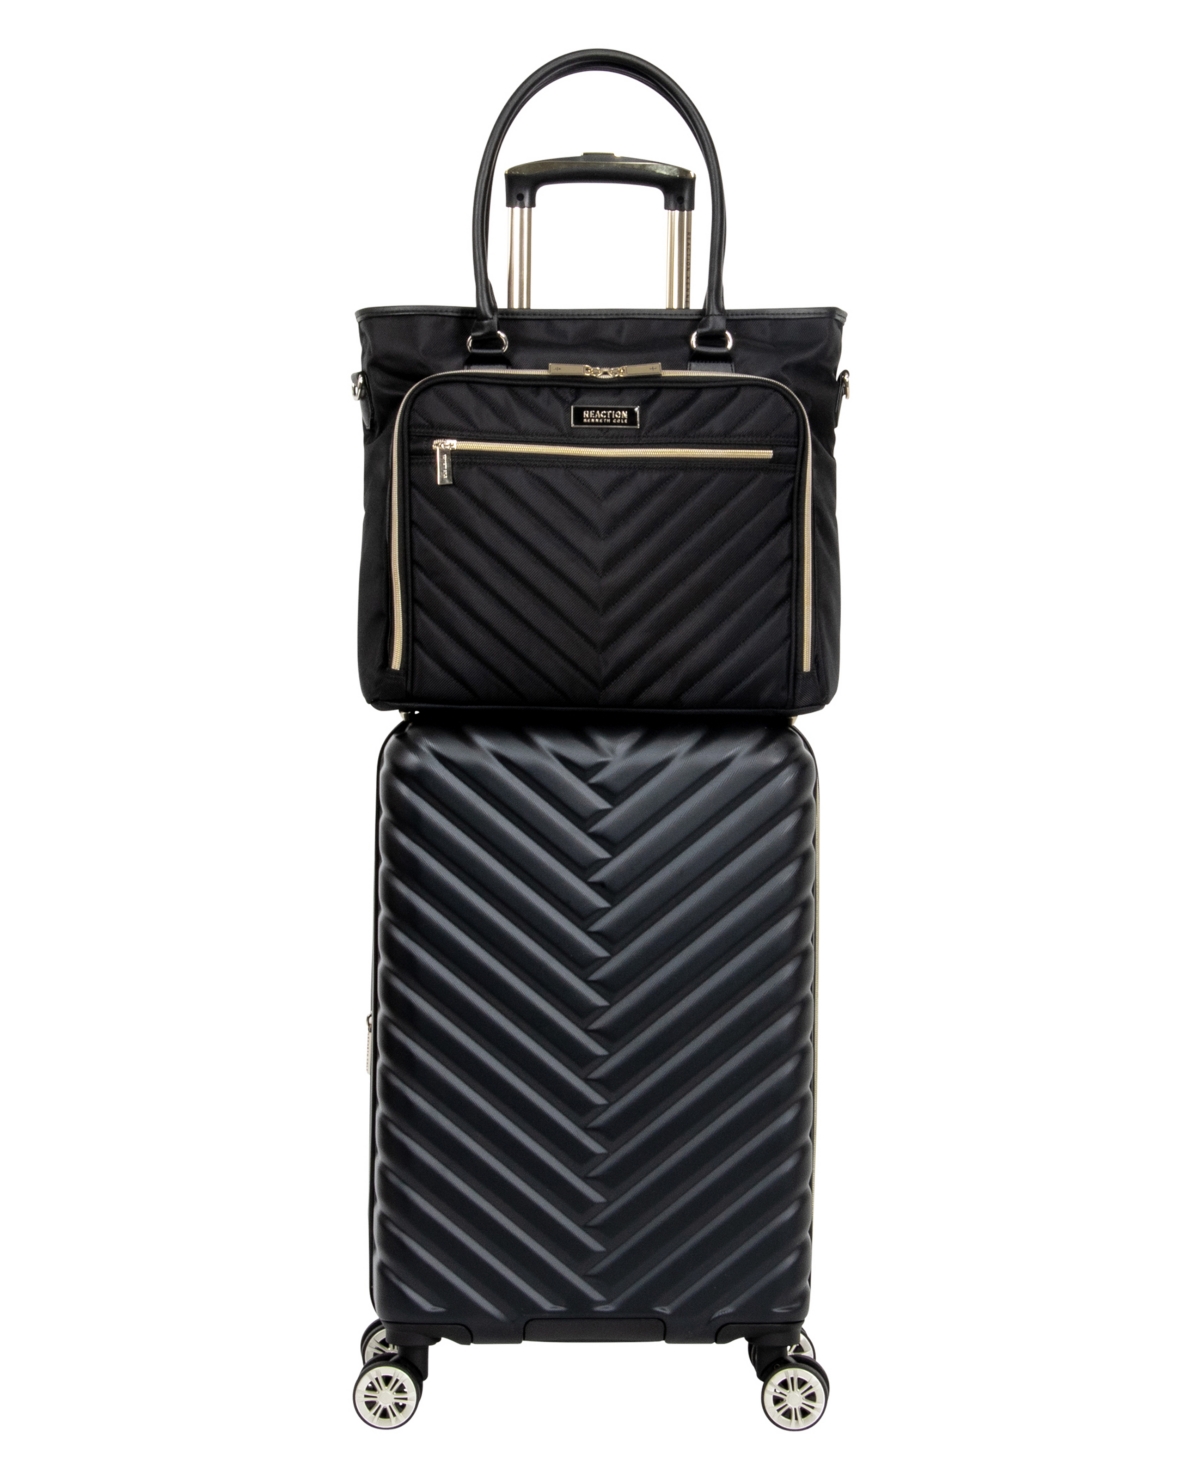 Madison Square Hardside Chevron Expandable Luggage, 2-Piece 20" Carry-On and Tote - Black